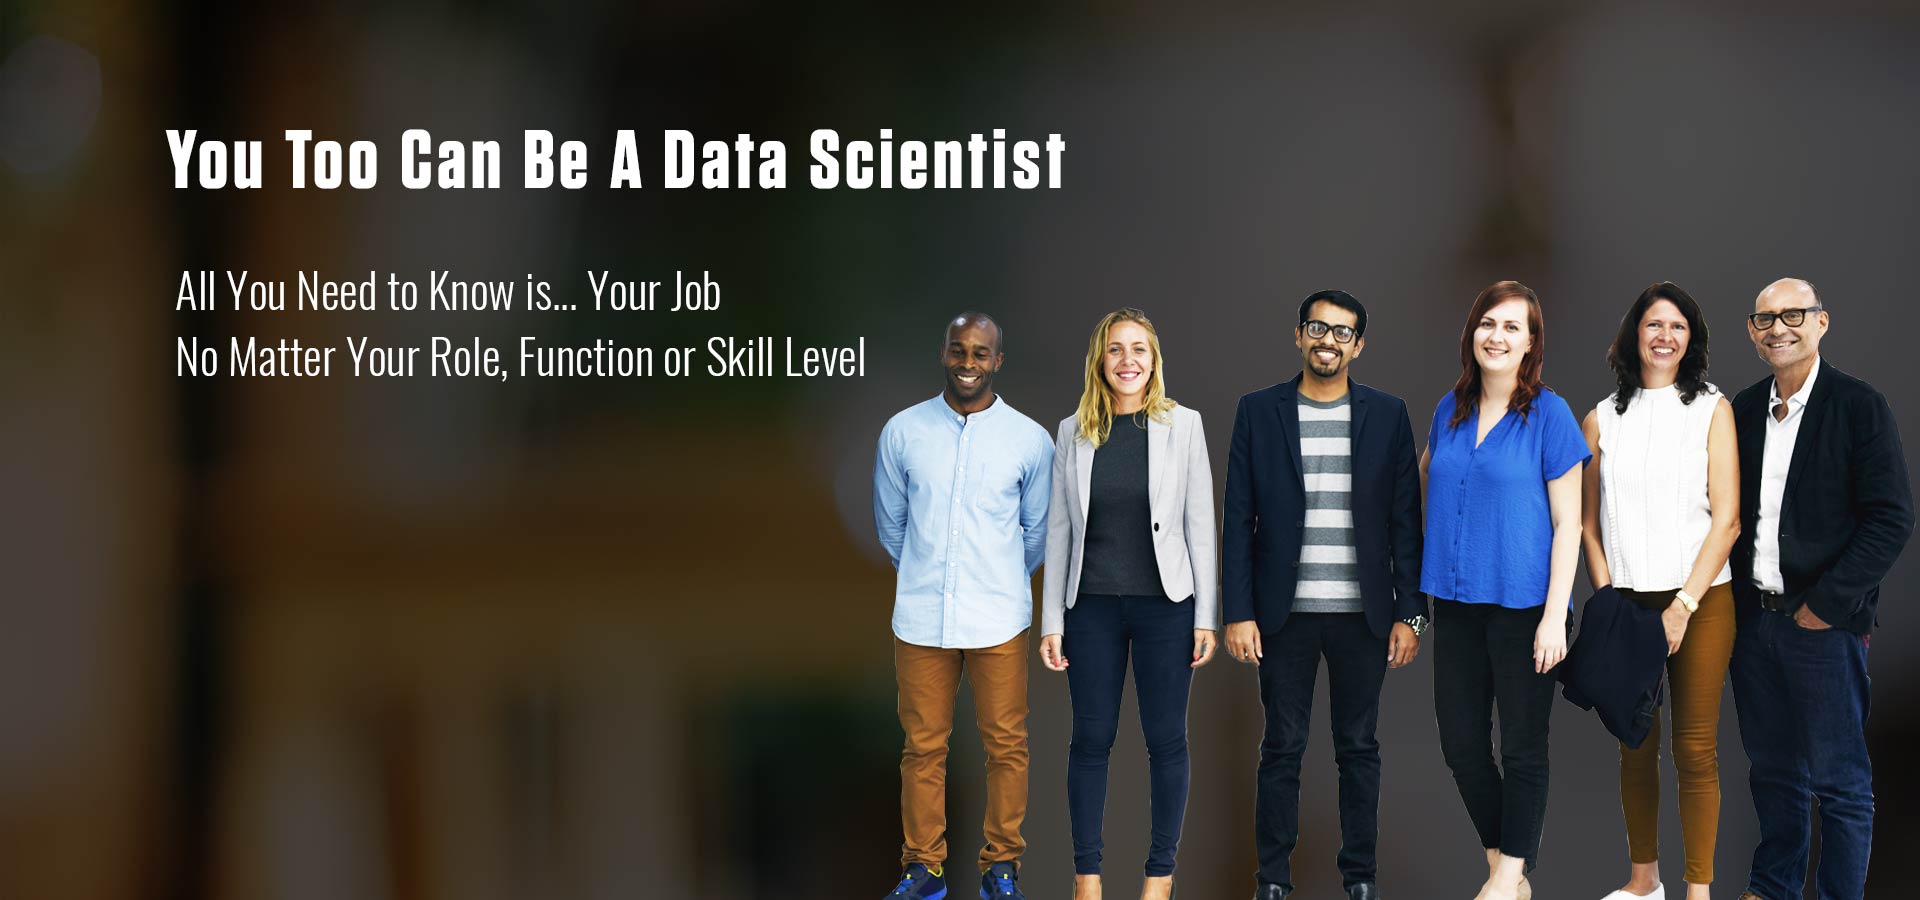 You Too Can Be A Data Scientist